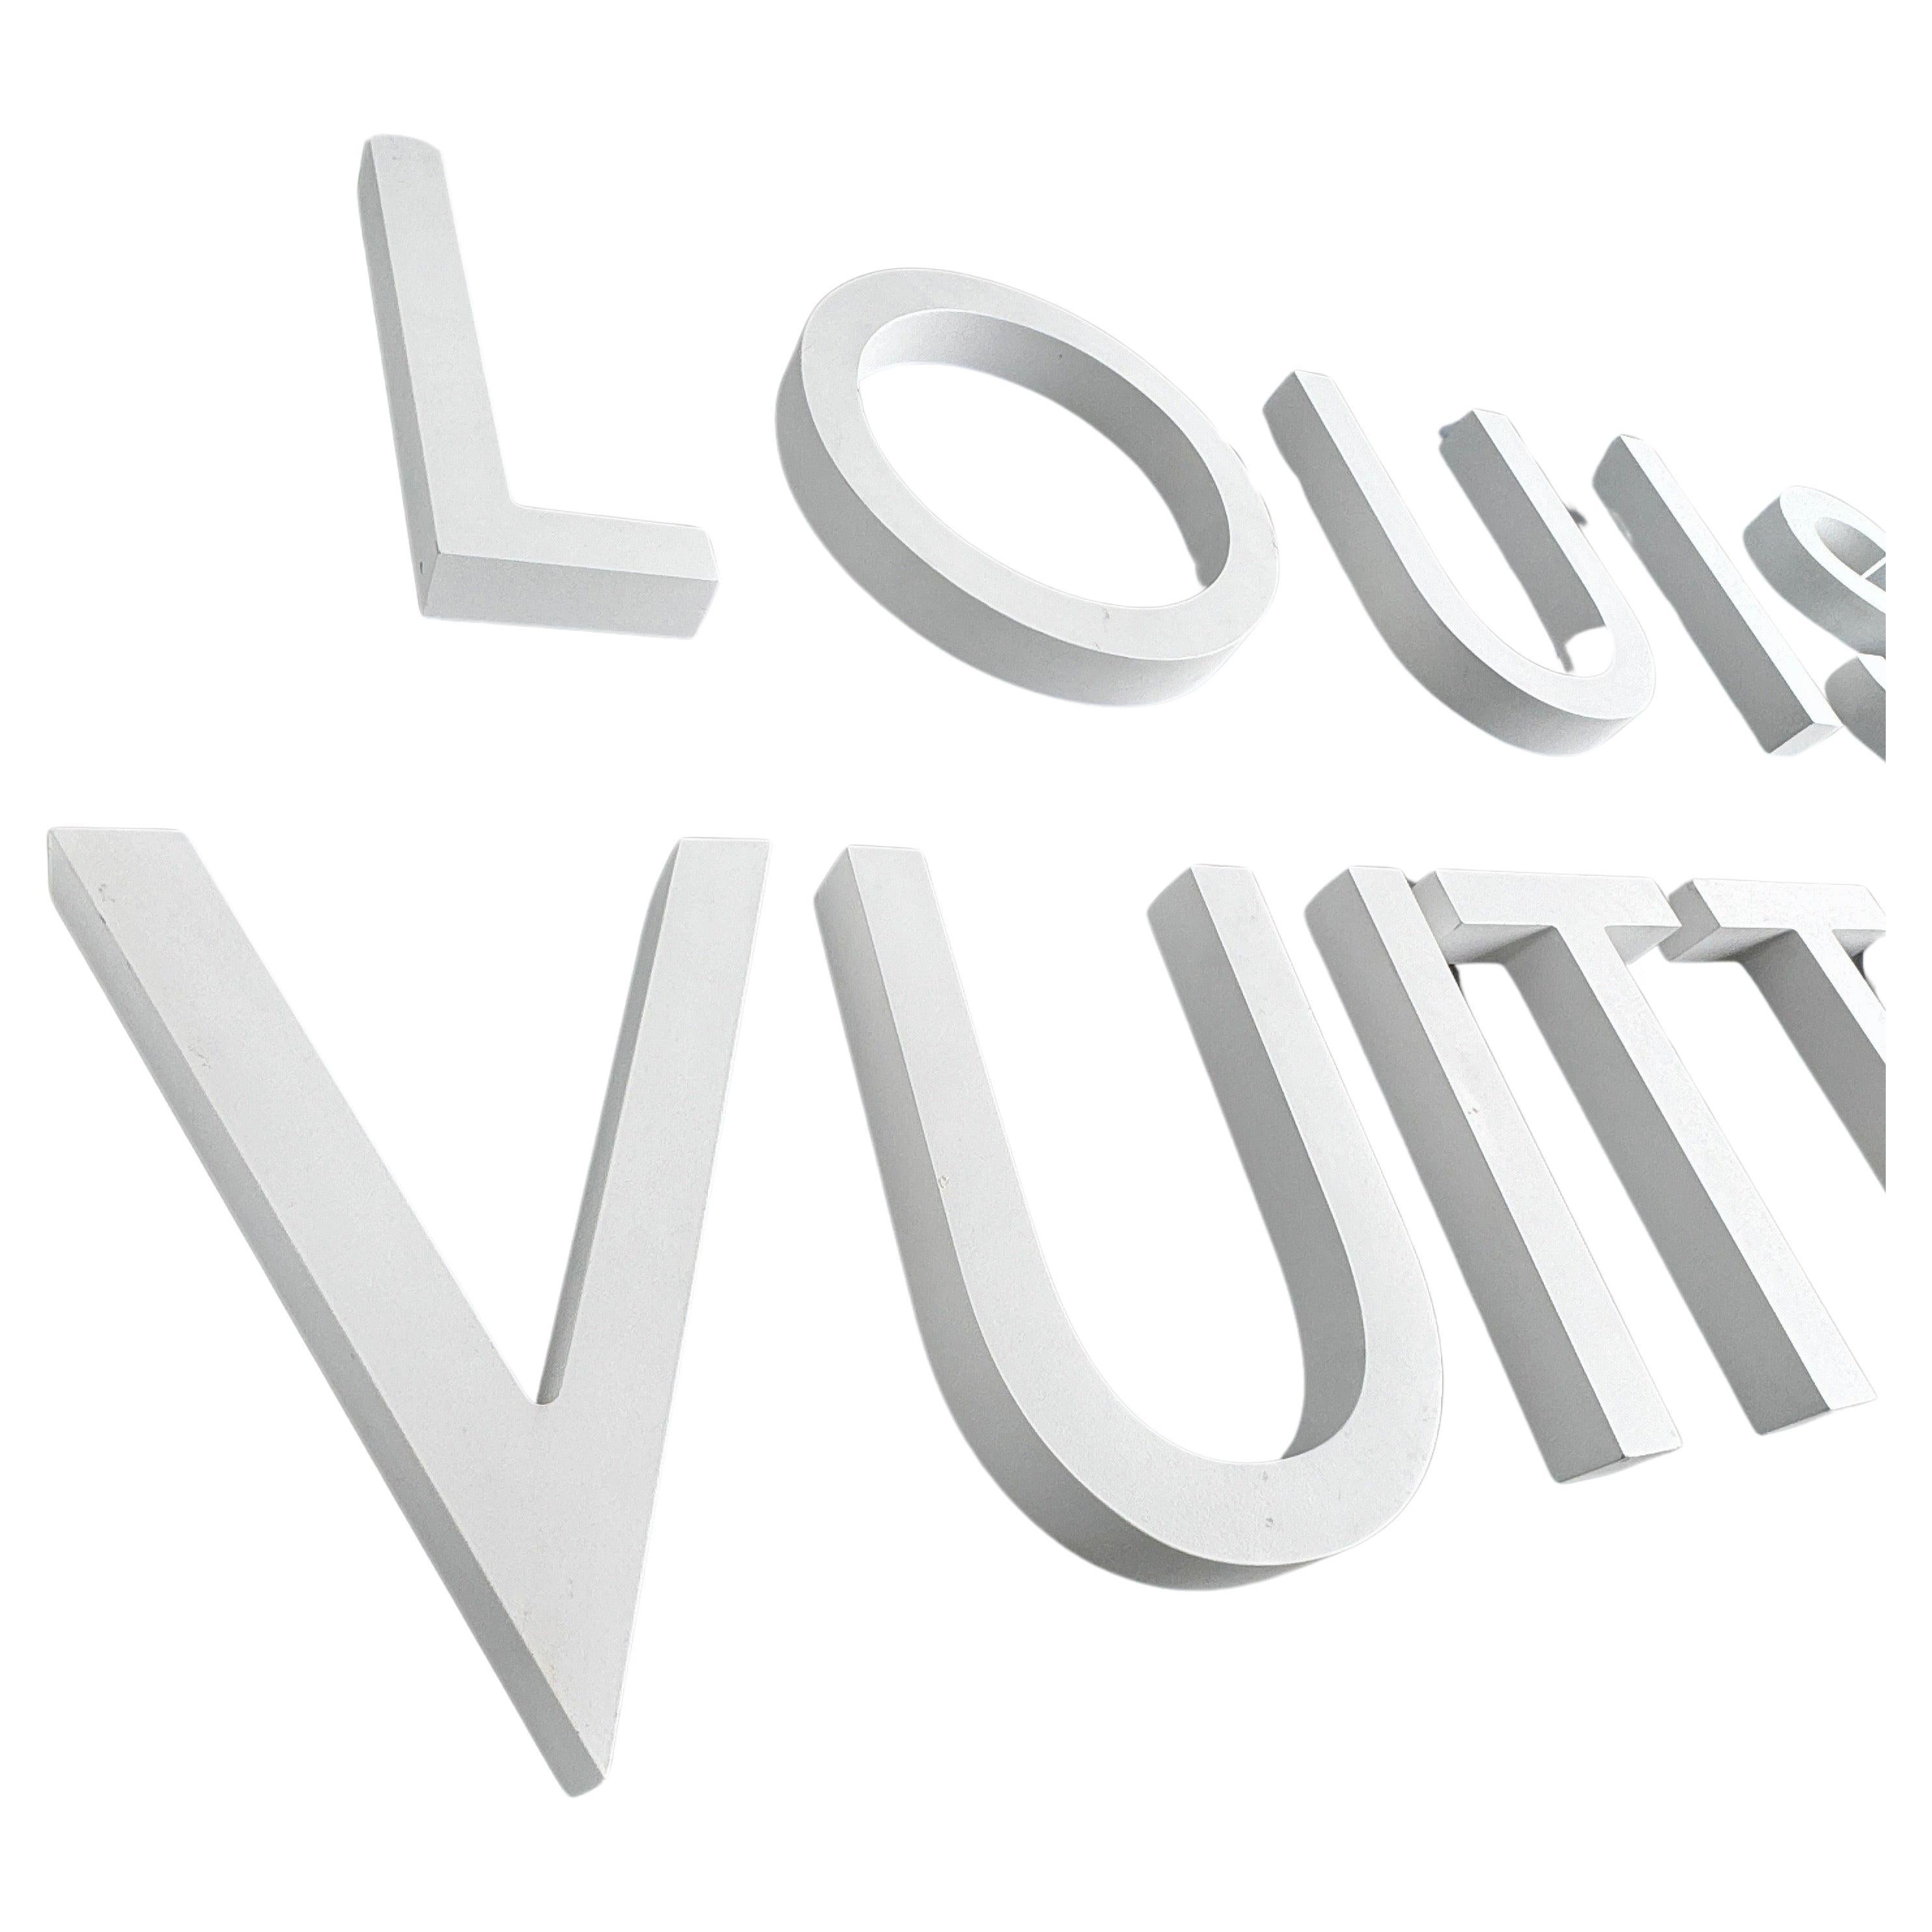 Louis Vuitton Set of Letters from LV Store Display

This large set of white letters actually came from a Louis Vuitton store. This collection would be a remarkable wall statement either in a private home or also could be used in a retail setting